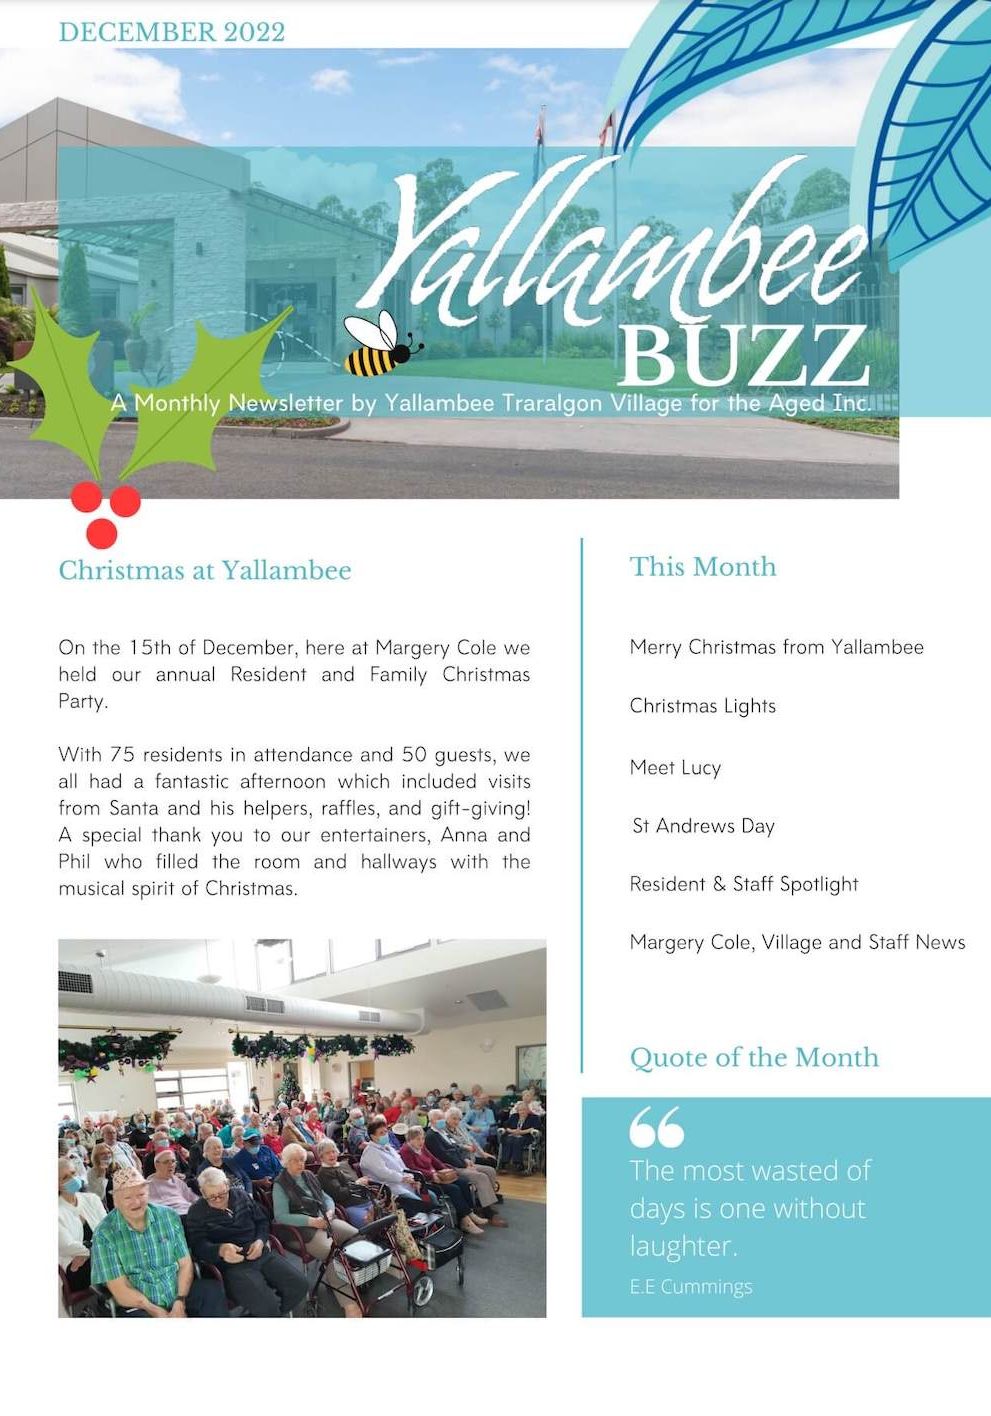 Screenshot of the cover of the December 2022 Yallambee Buzz newsletter.